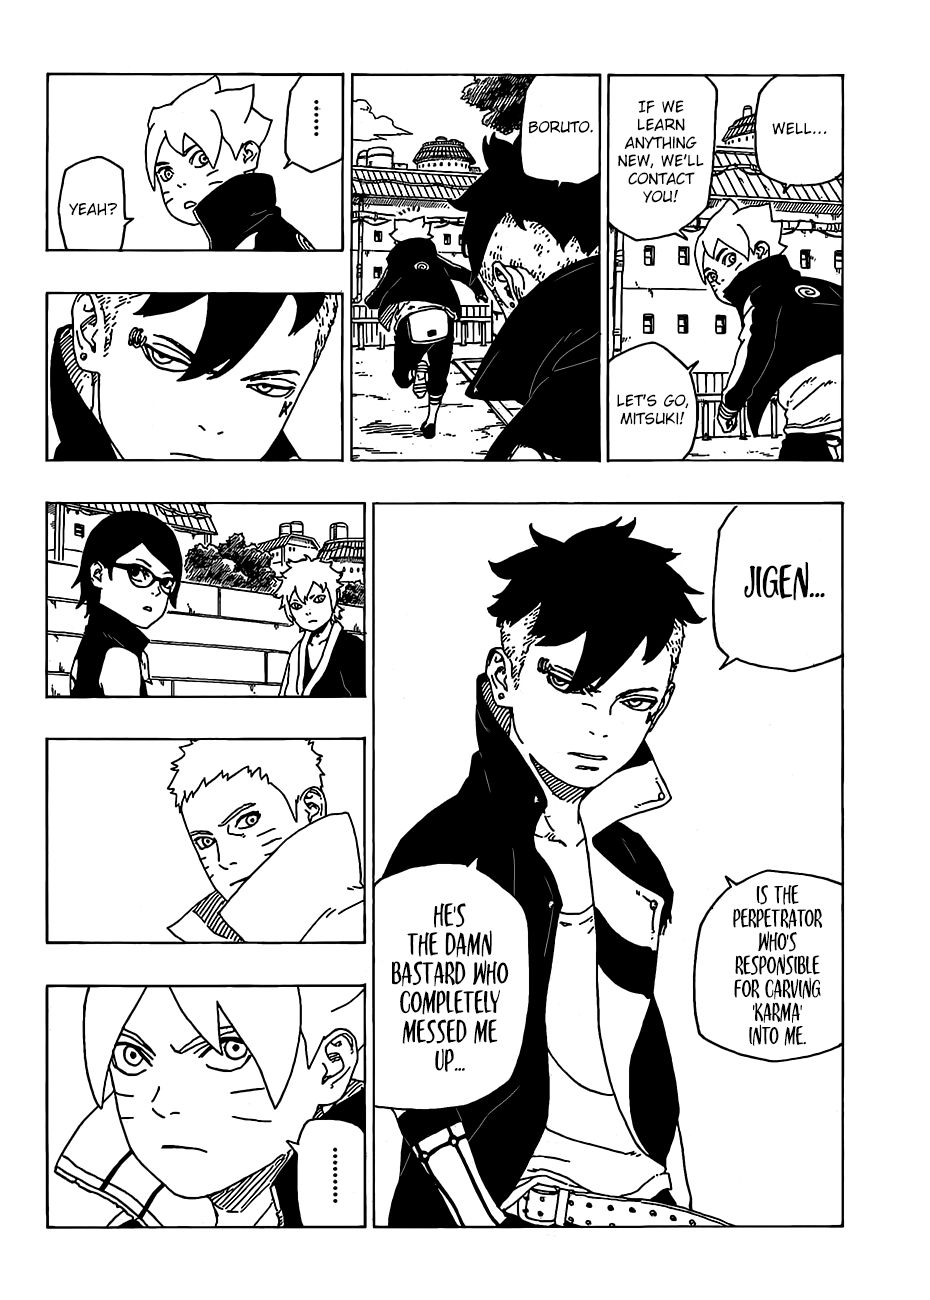 Boruto: Naruto Next Generations Chapter 35 : It's up to You | Page 27